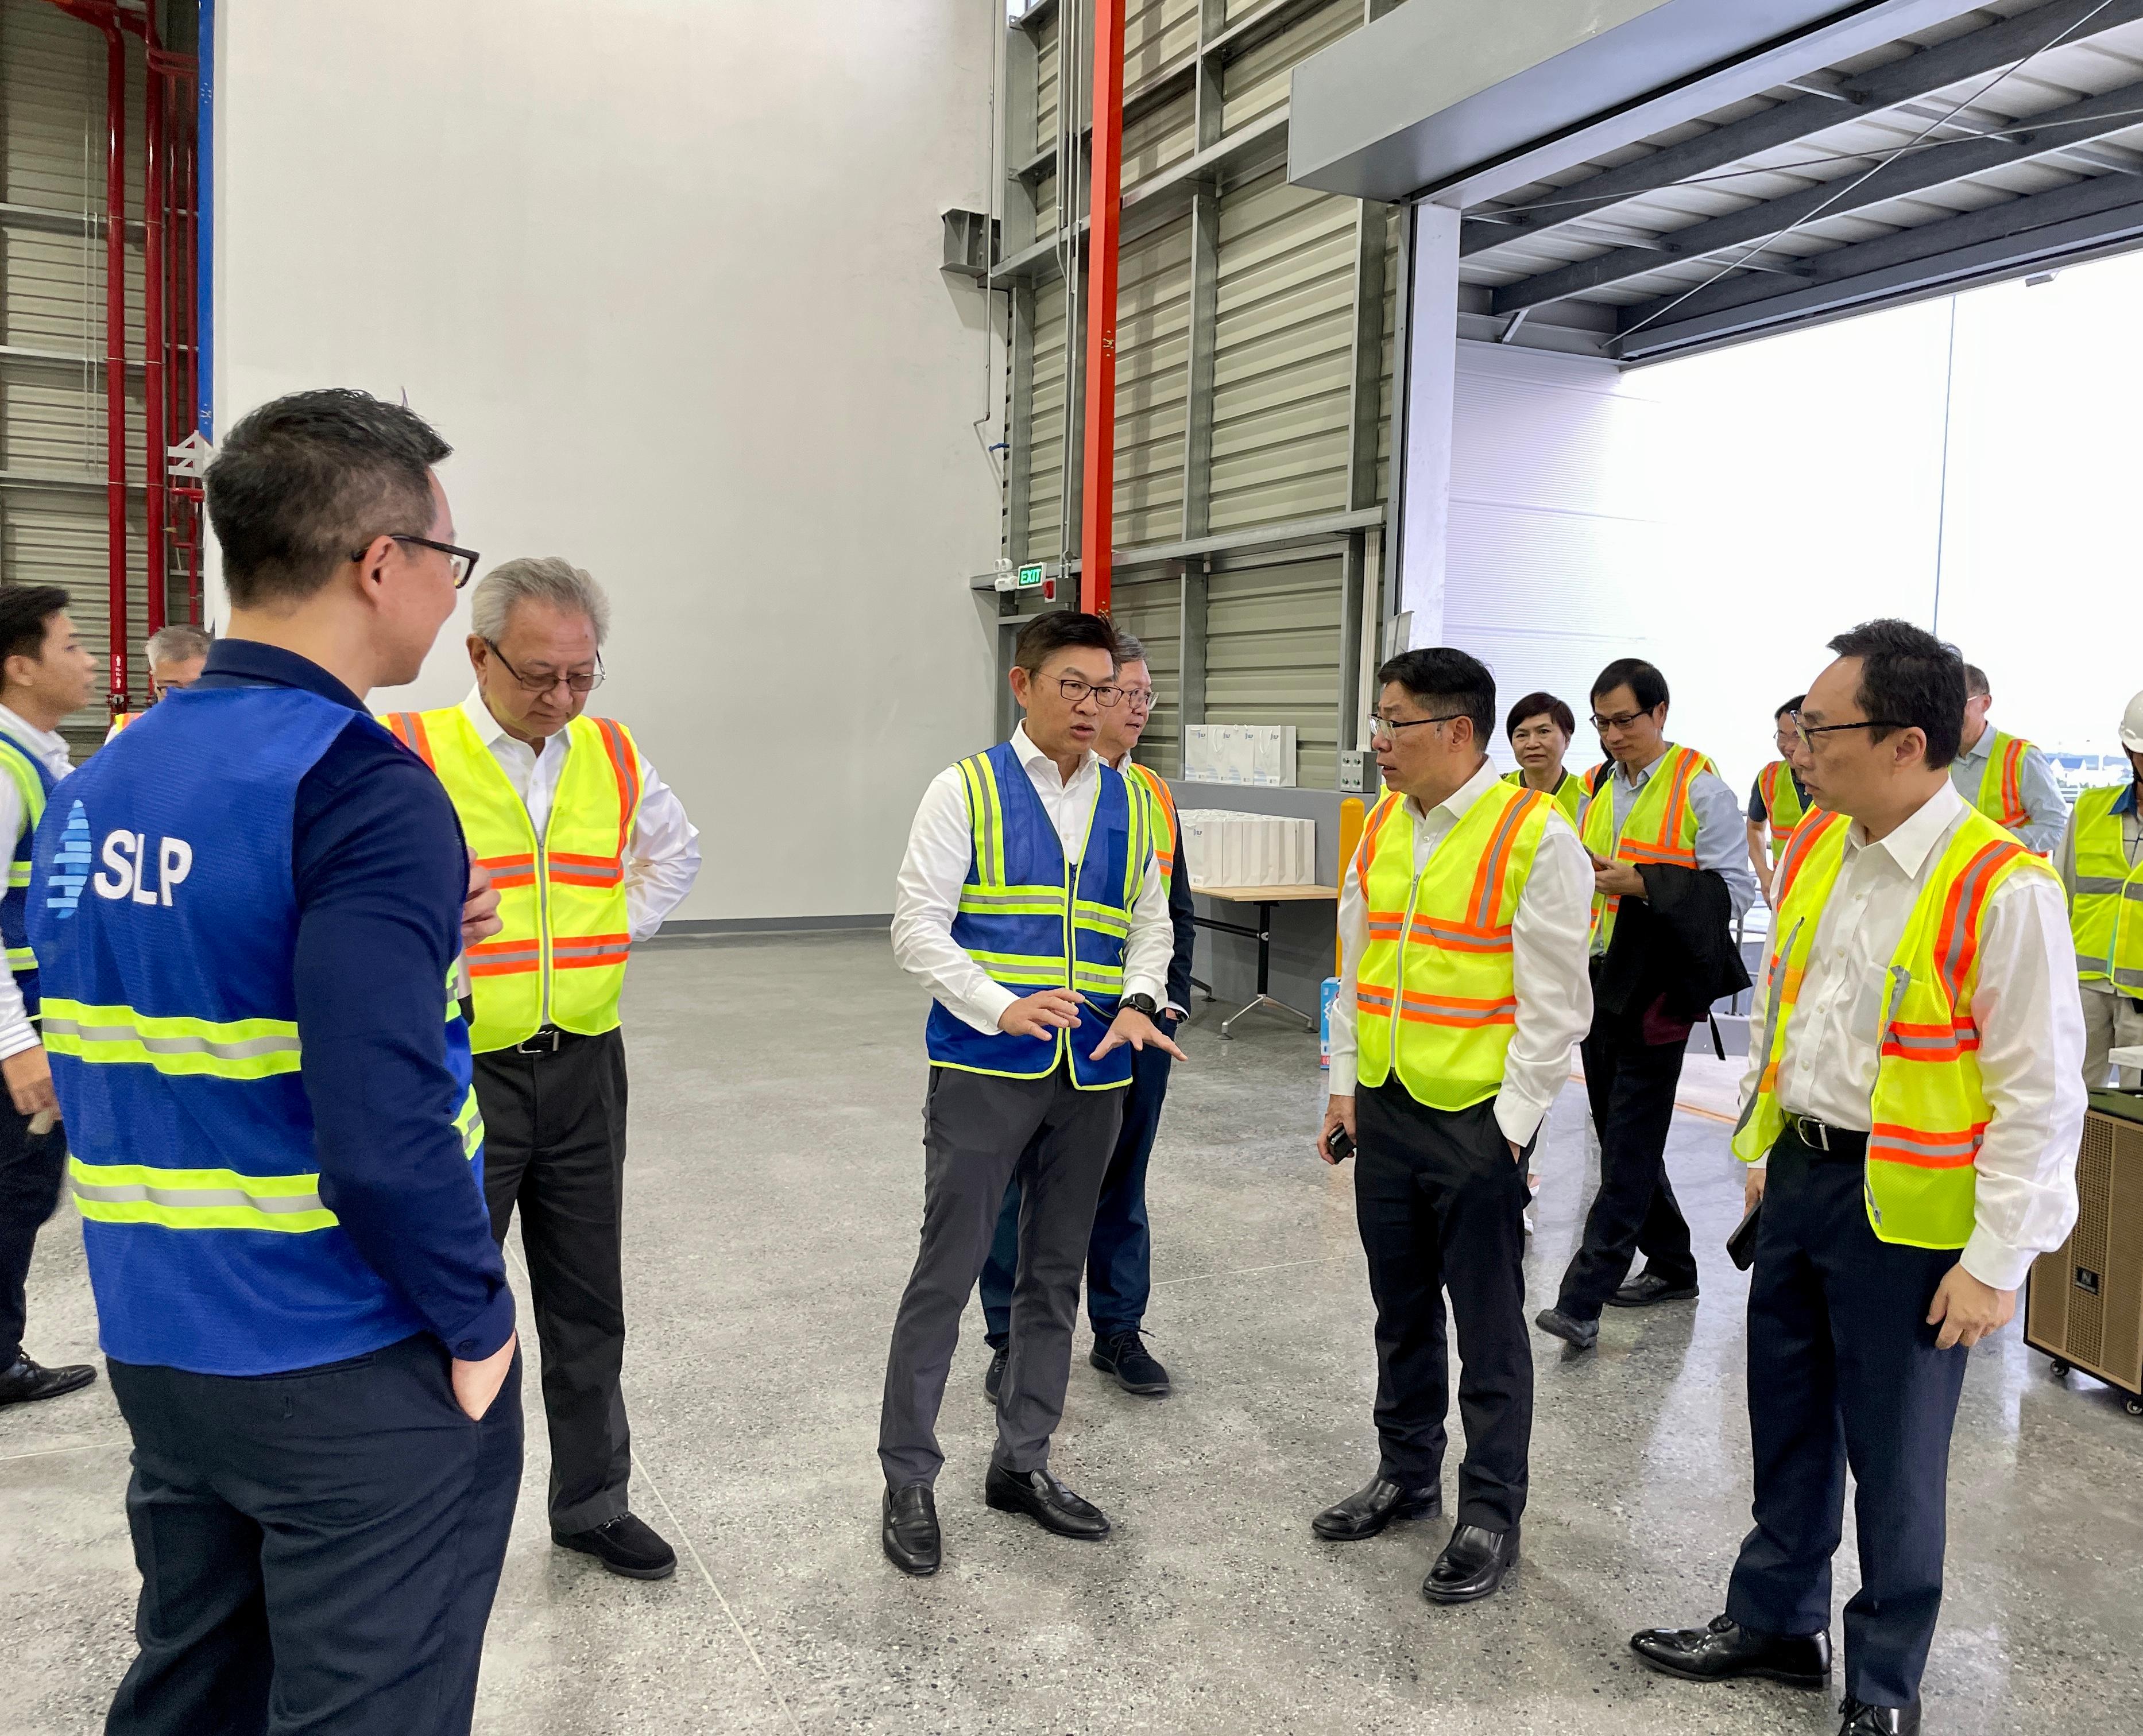 The Secretary for Transport and Logistics, Mr Lam Sai-hung (second right), together with members of the Hong Kong Logistics Development Council delegation, visited a large-scale smart logistics park in Ho Chi Minh City to inspect its facilities today (October 12).
